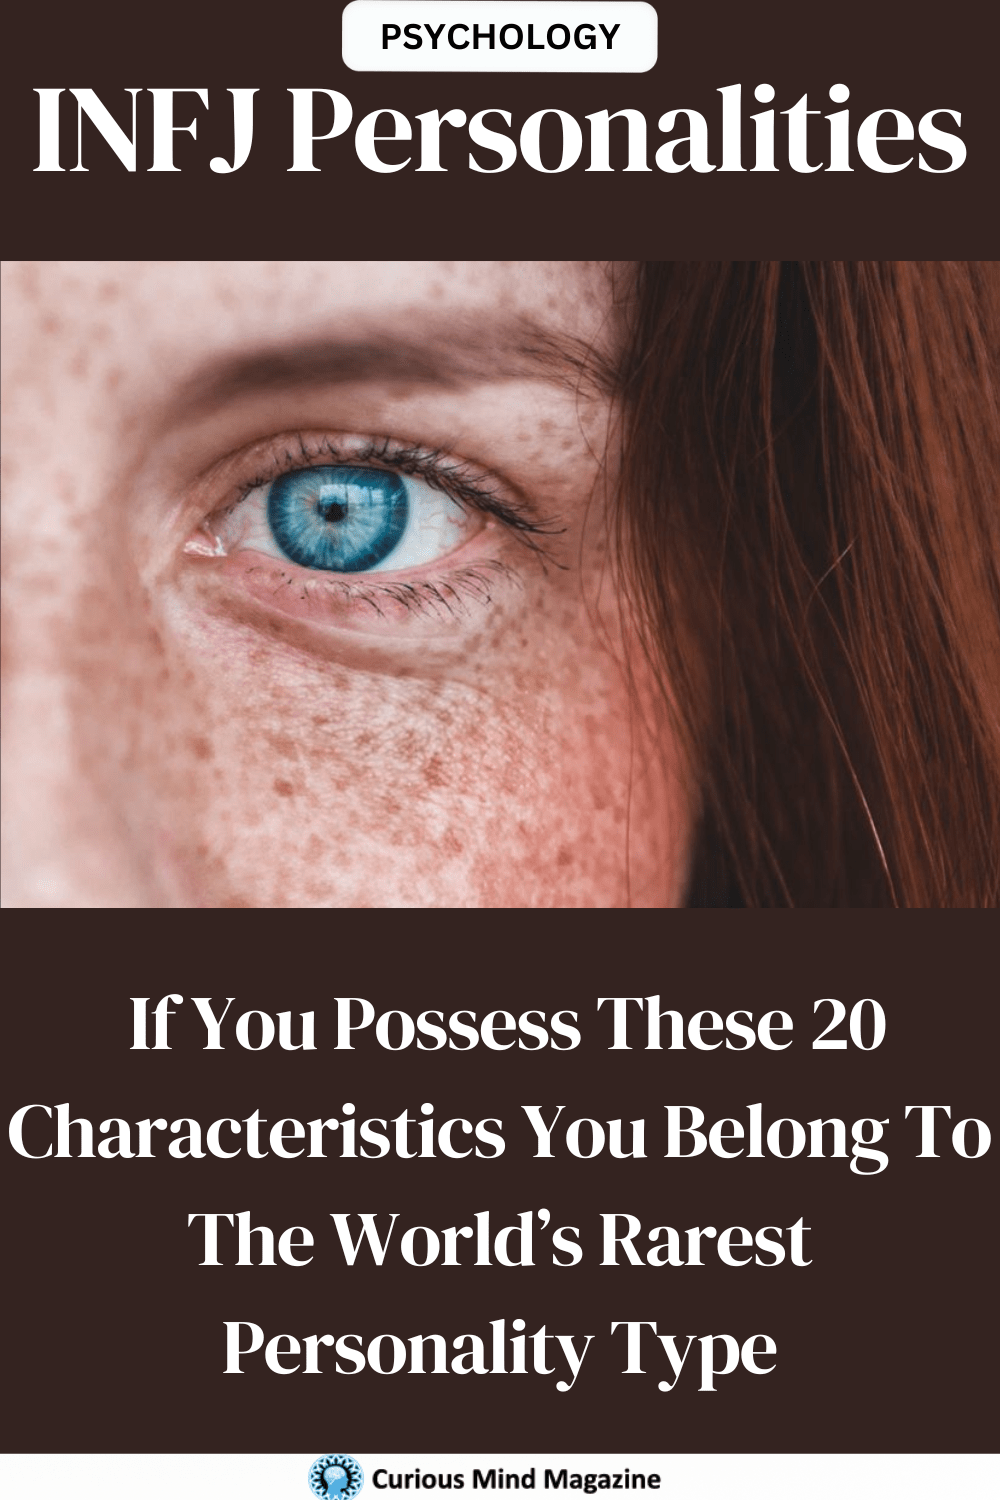 INFJ Personalities – If You Possess These 20 Characteristics You Belong To The World’s Rarest Personality Type